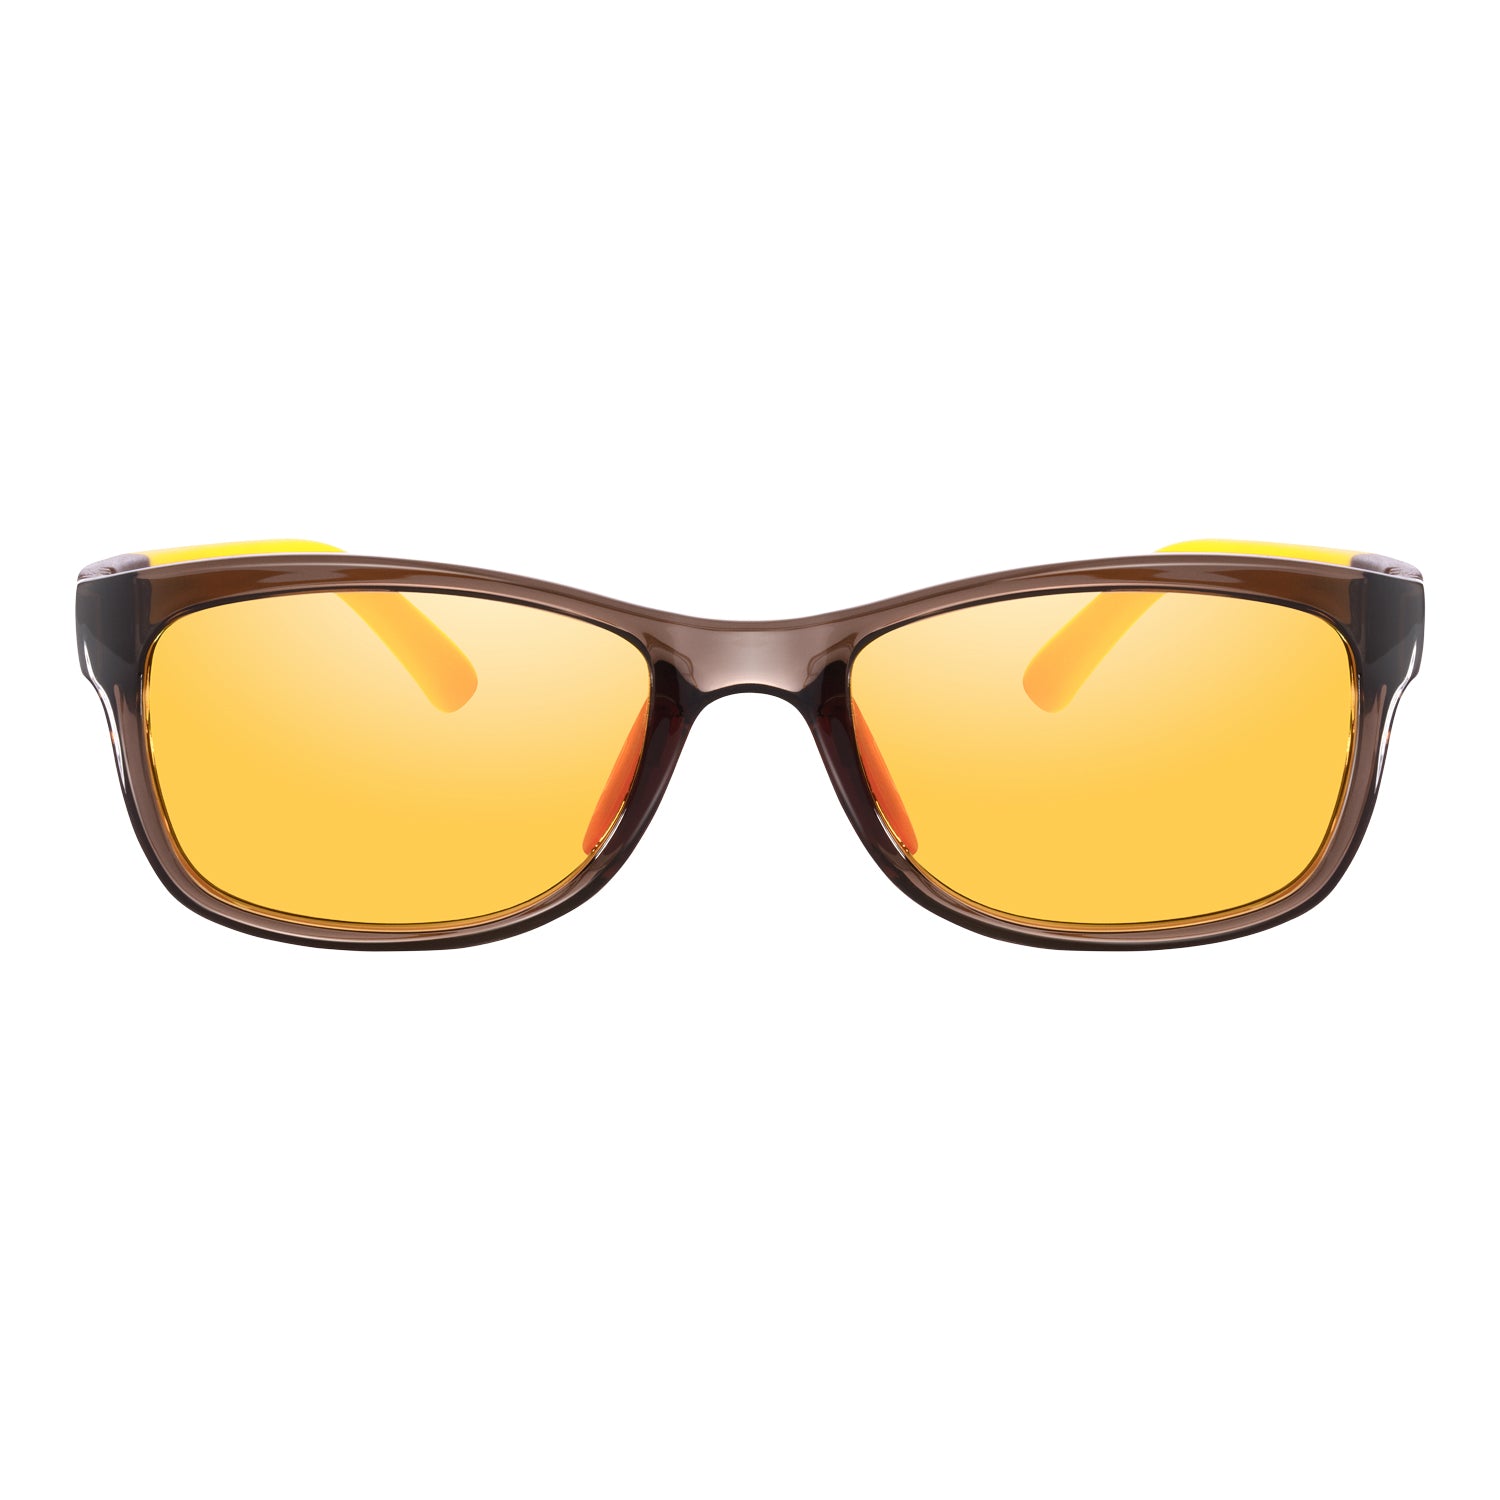 PRiSMA KiDS Blue Light Blocking Glasses for Children & Small Adults - Strong and flexible nylon frame  - brown & yellow